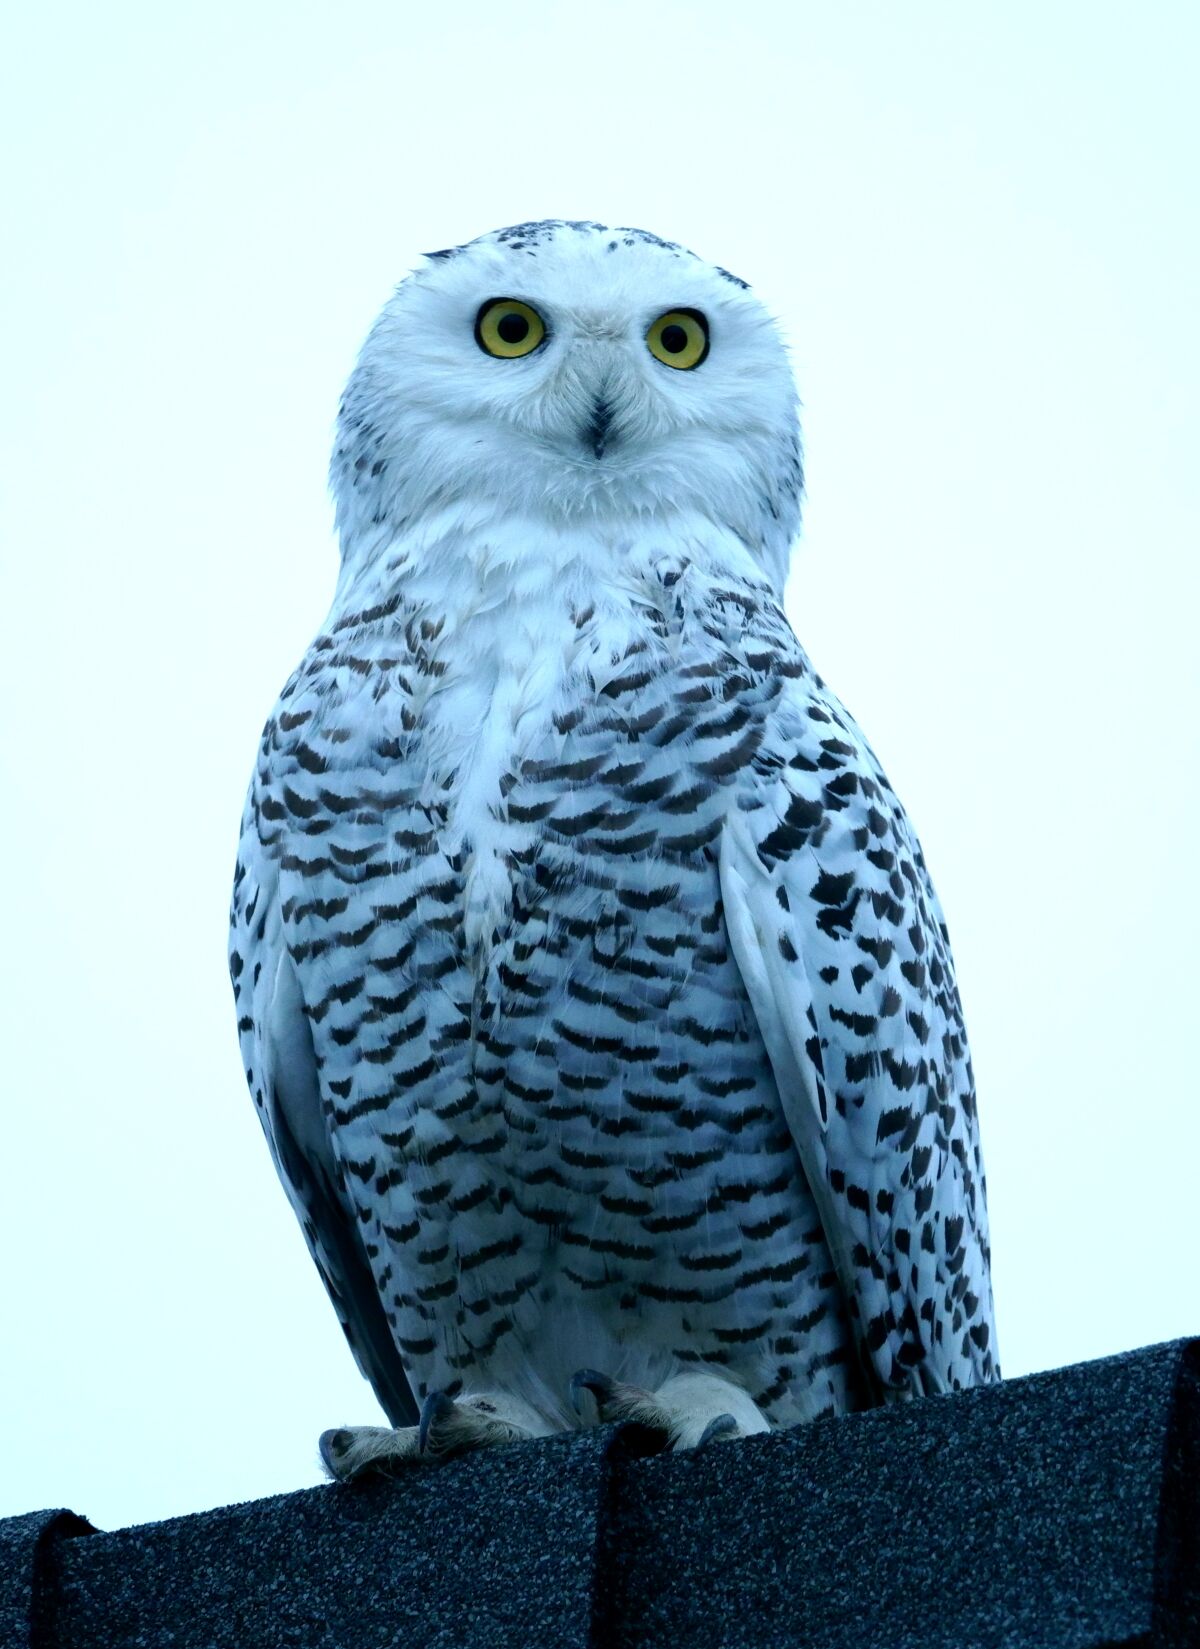 A snowy owl perches on a roof